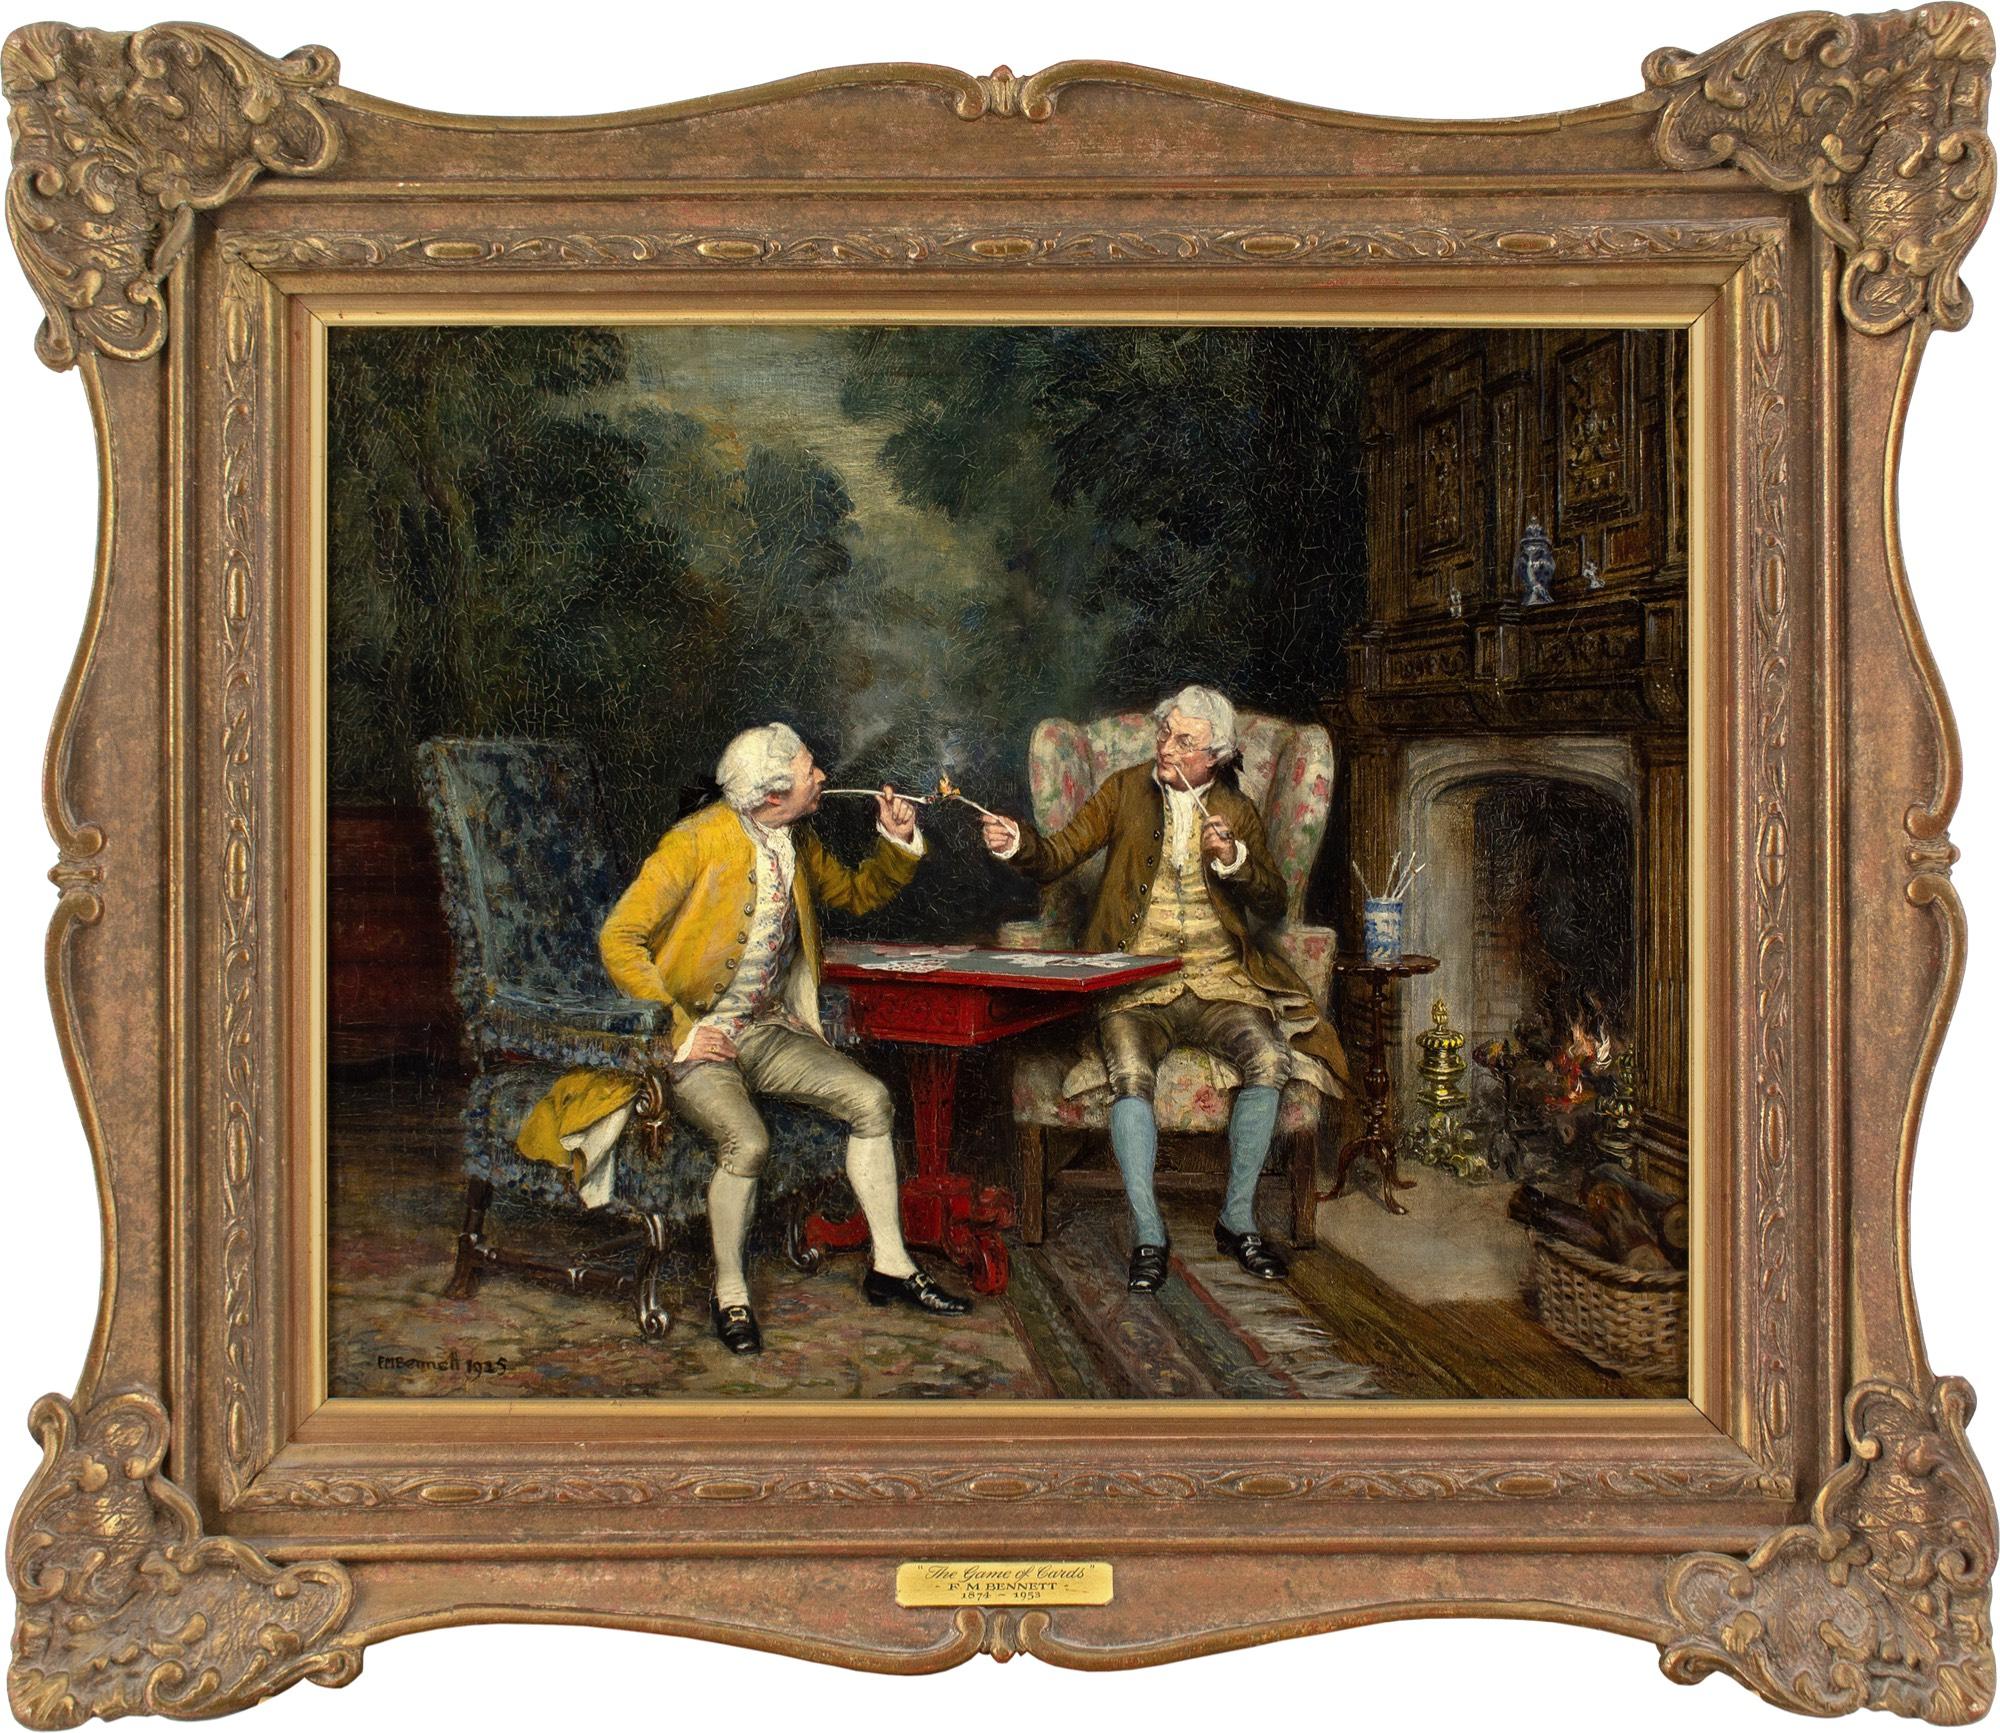 This fine early 20th-century oil painting by British artist Frank Moss Bennett (1874-1952) depicts two 18th-century gentlemen in periwigs playing cards by a fire.

Frank Moss Bennett was a distinguished painter of portraits, architecture and genre